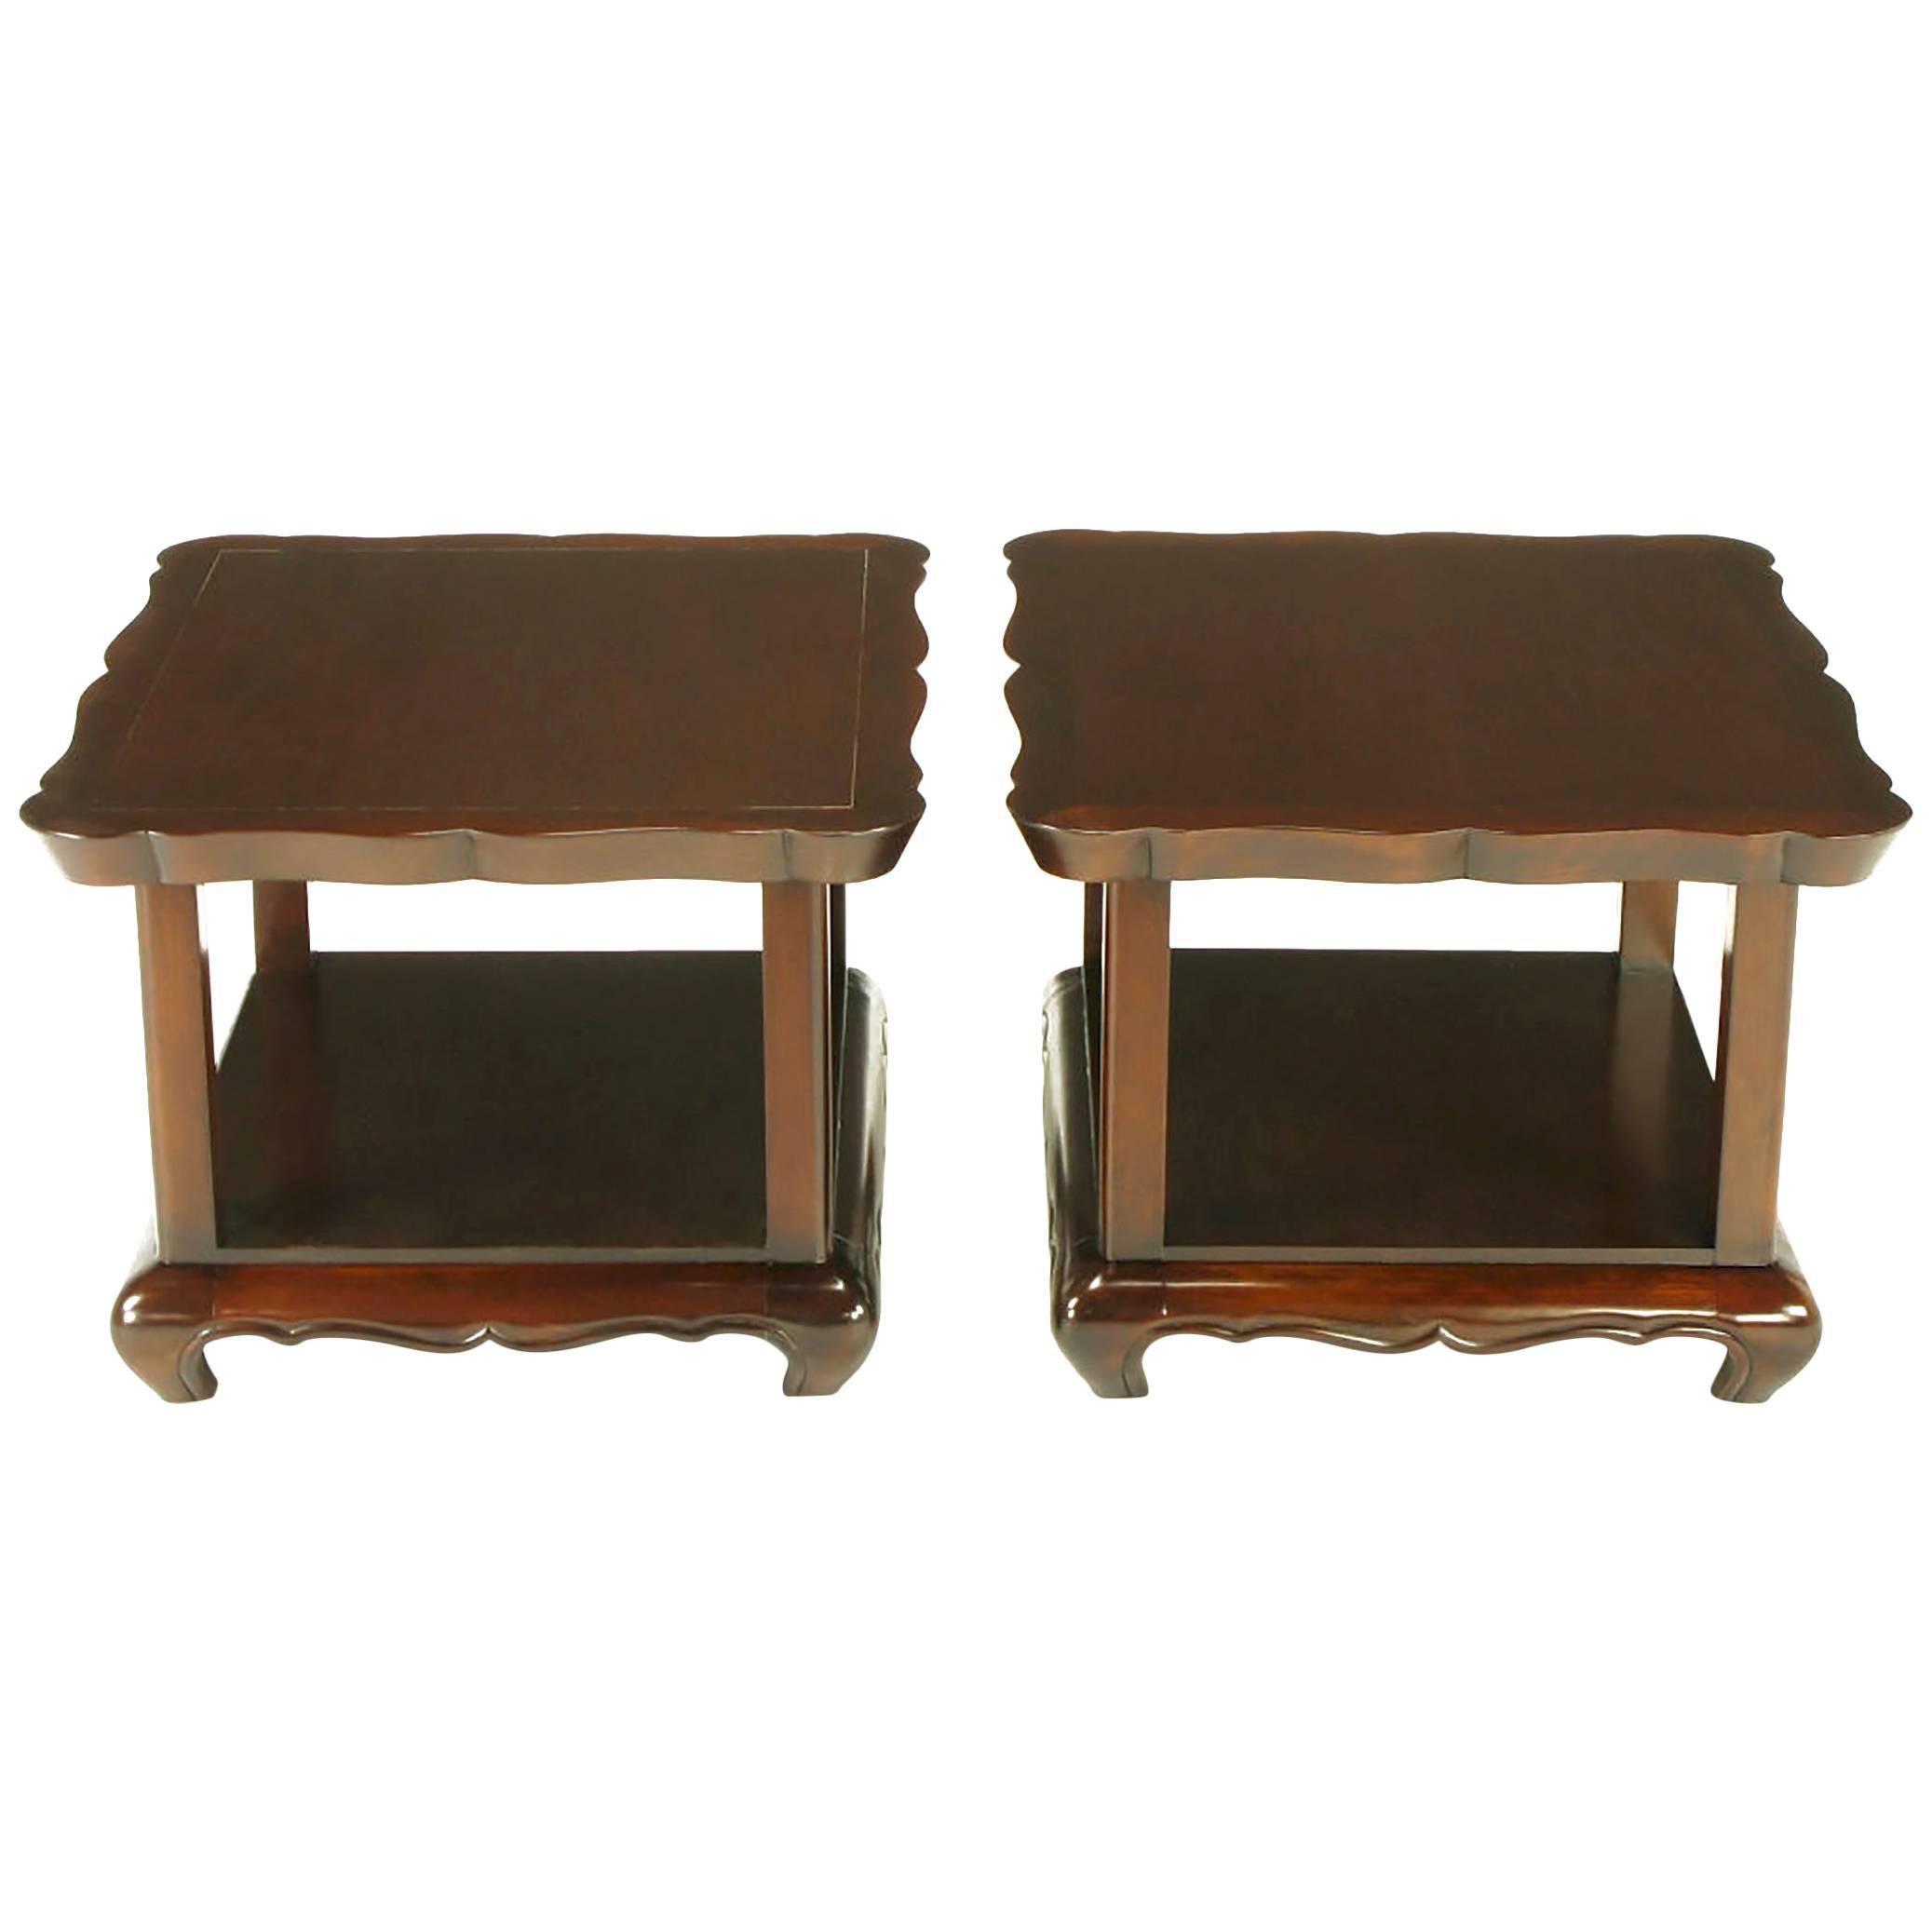 Pair of Walnut End Tables with Scalloped Edge Tops For Sale